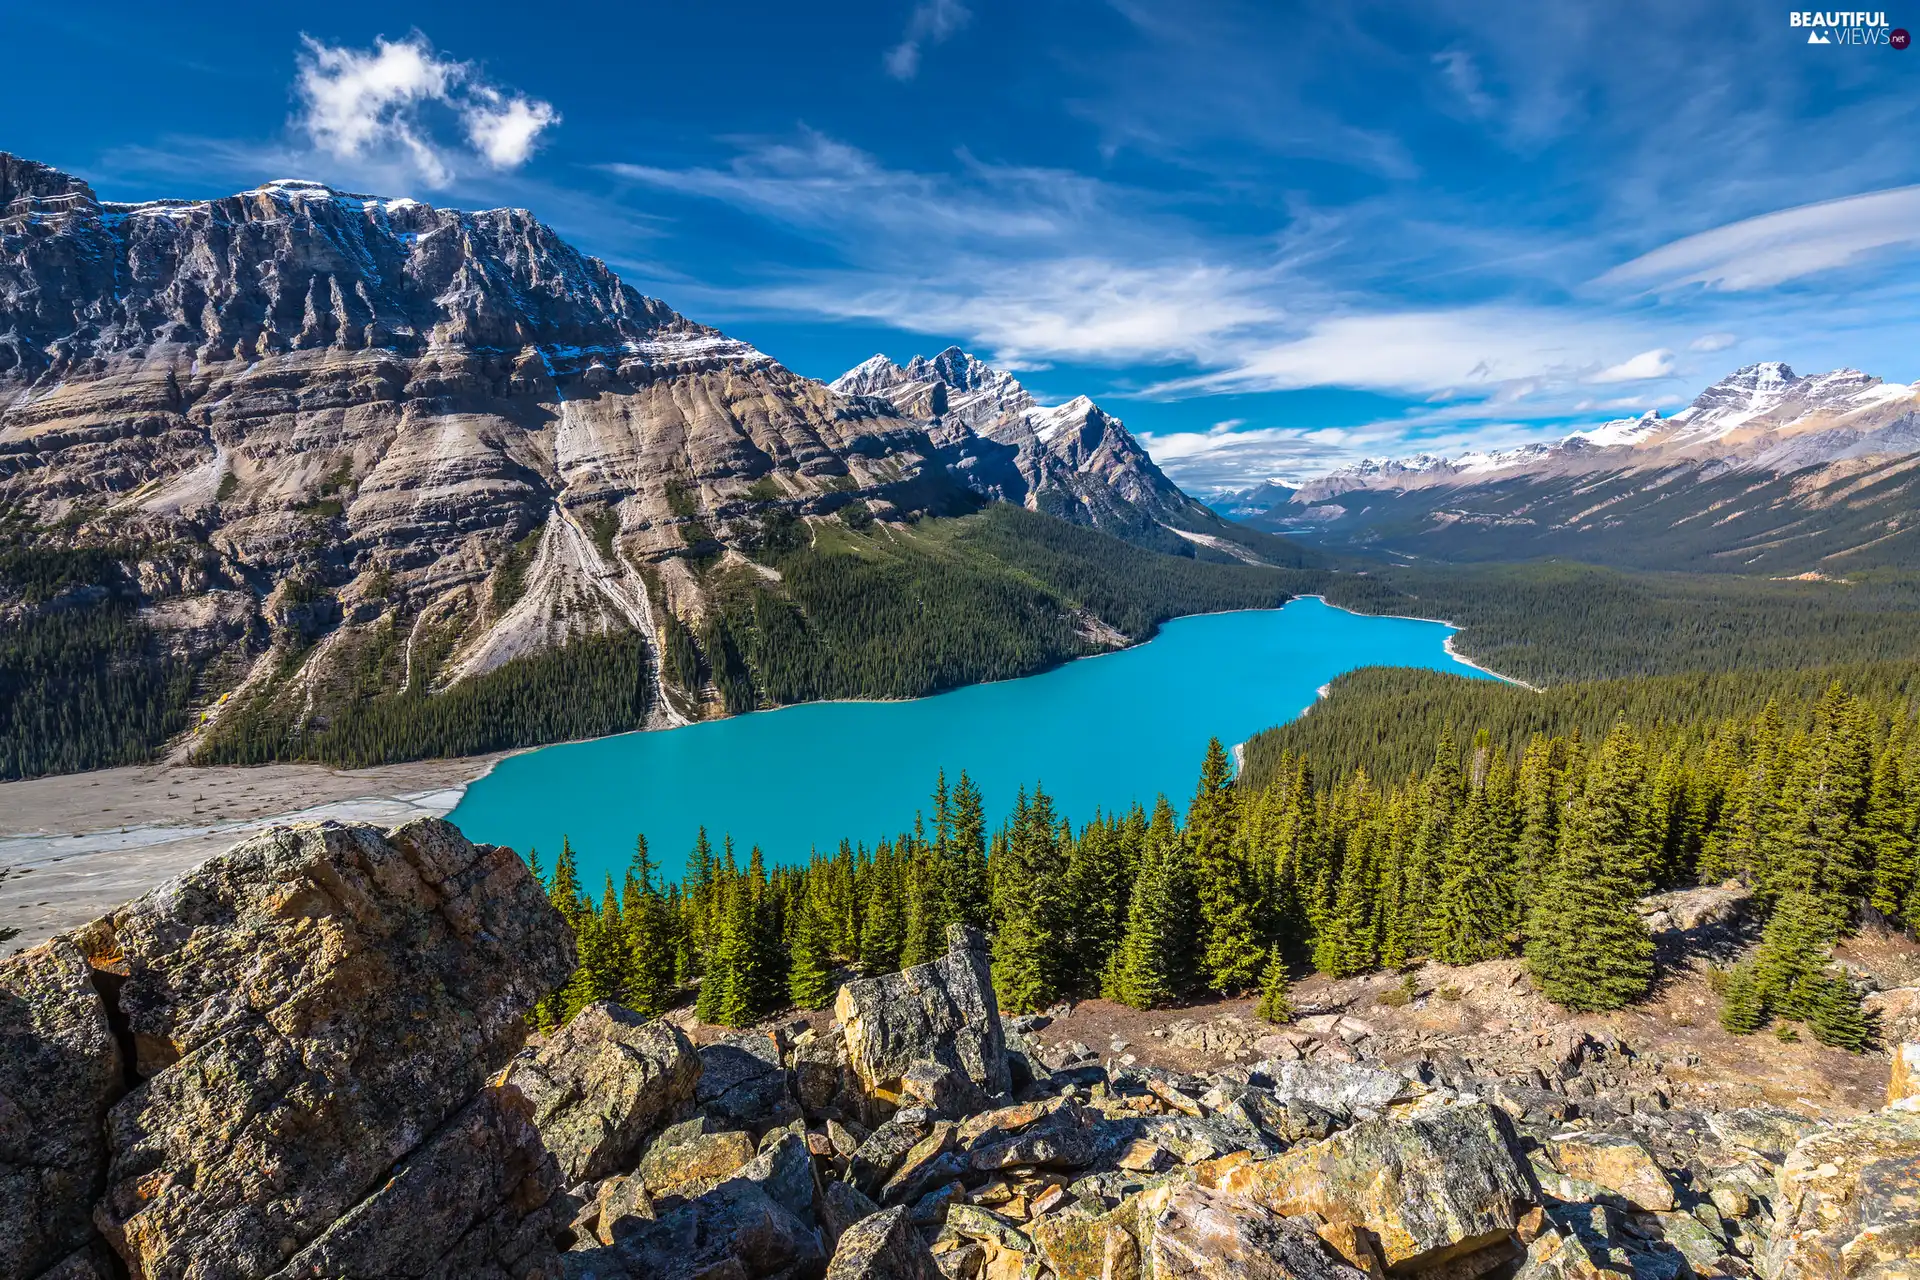 viewes, Peyto Lake, Mountains, Province of Alberta, forest, Banff National Park, rocks, Canada, clouds, trees